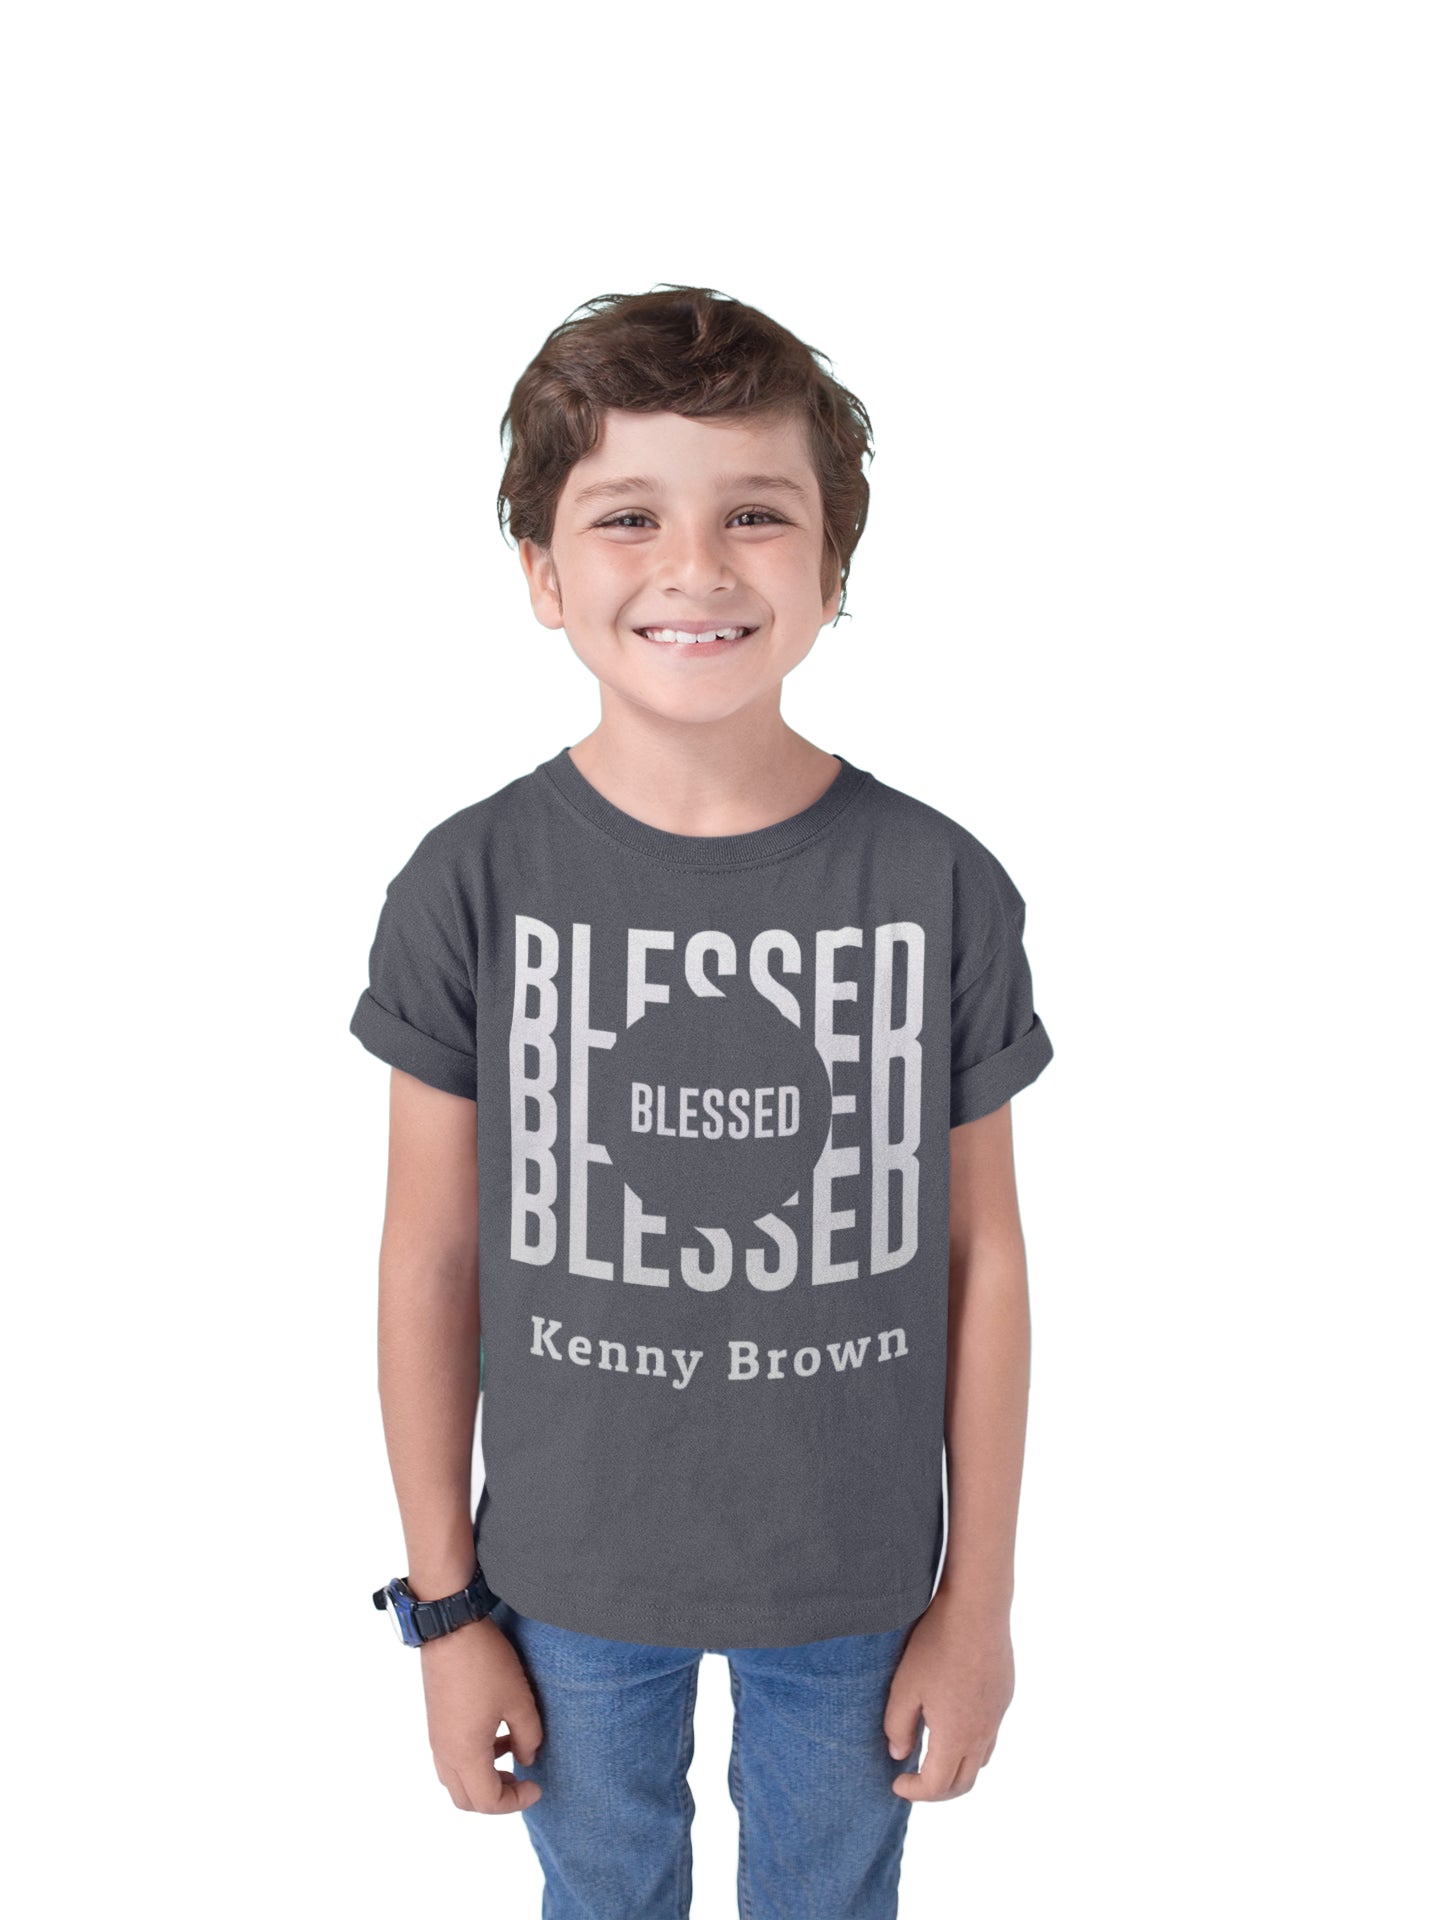 T-Shirts - Personalized Christian Themed Youth T-shirts - Blessed